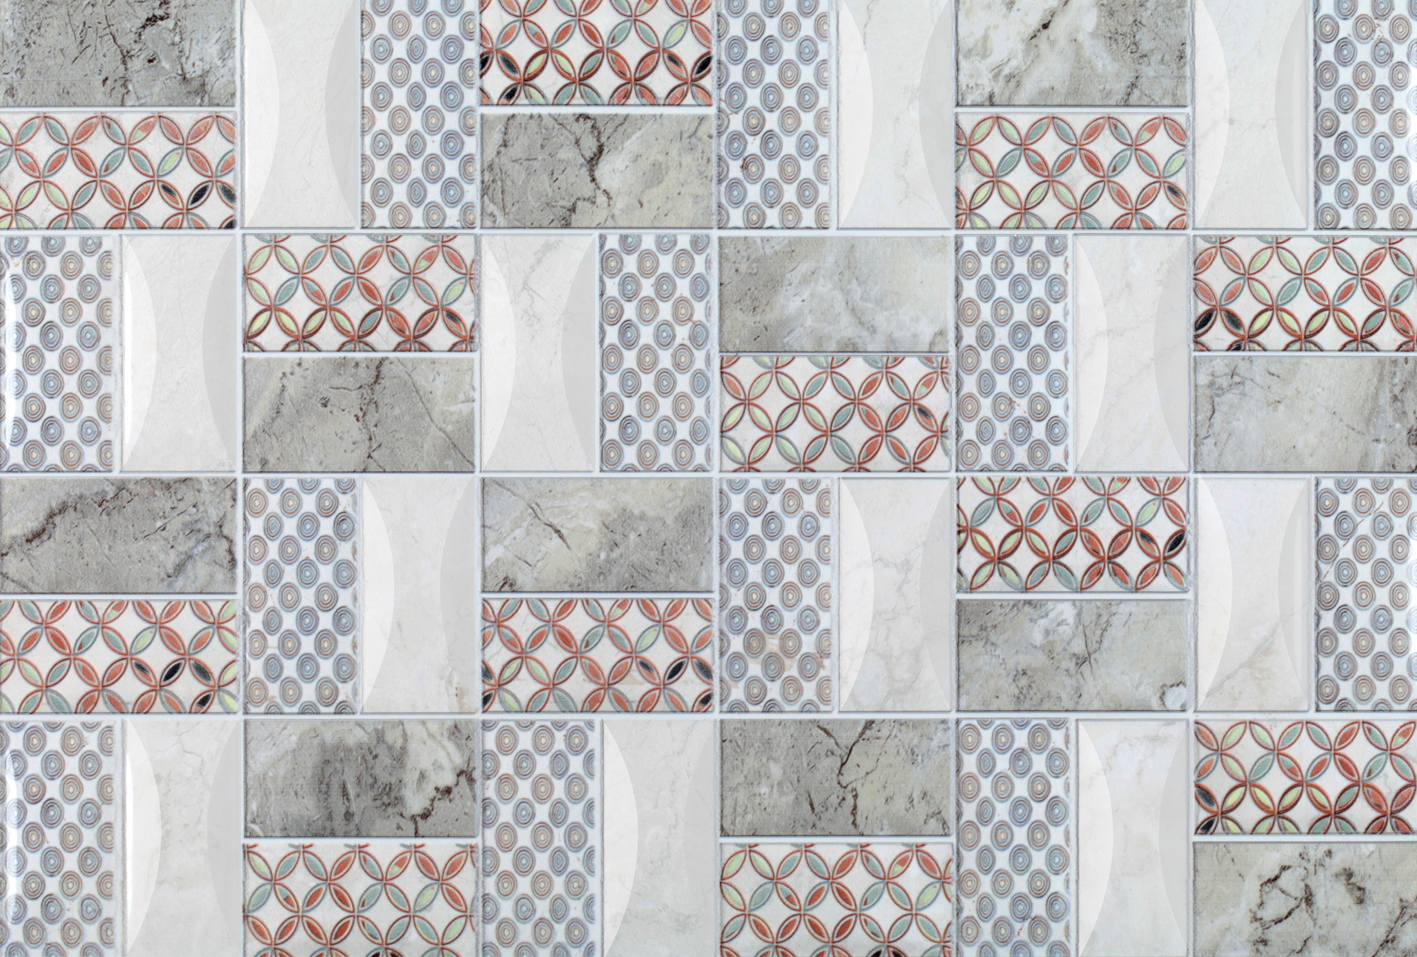 Abstract Tiles for Accent Tiles